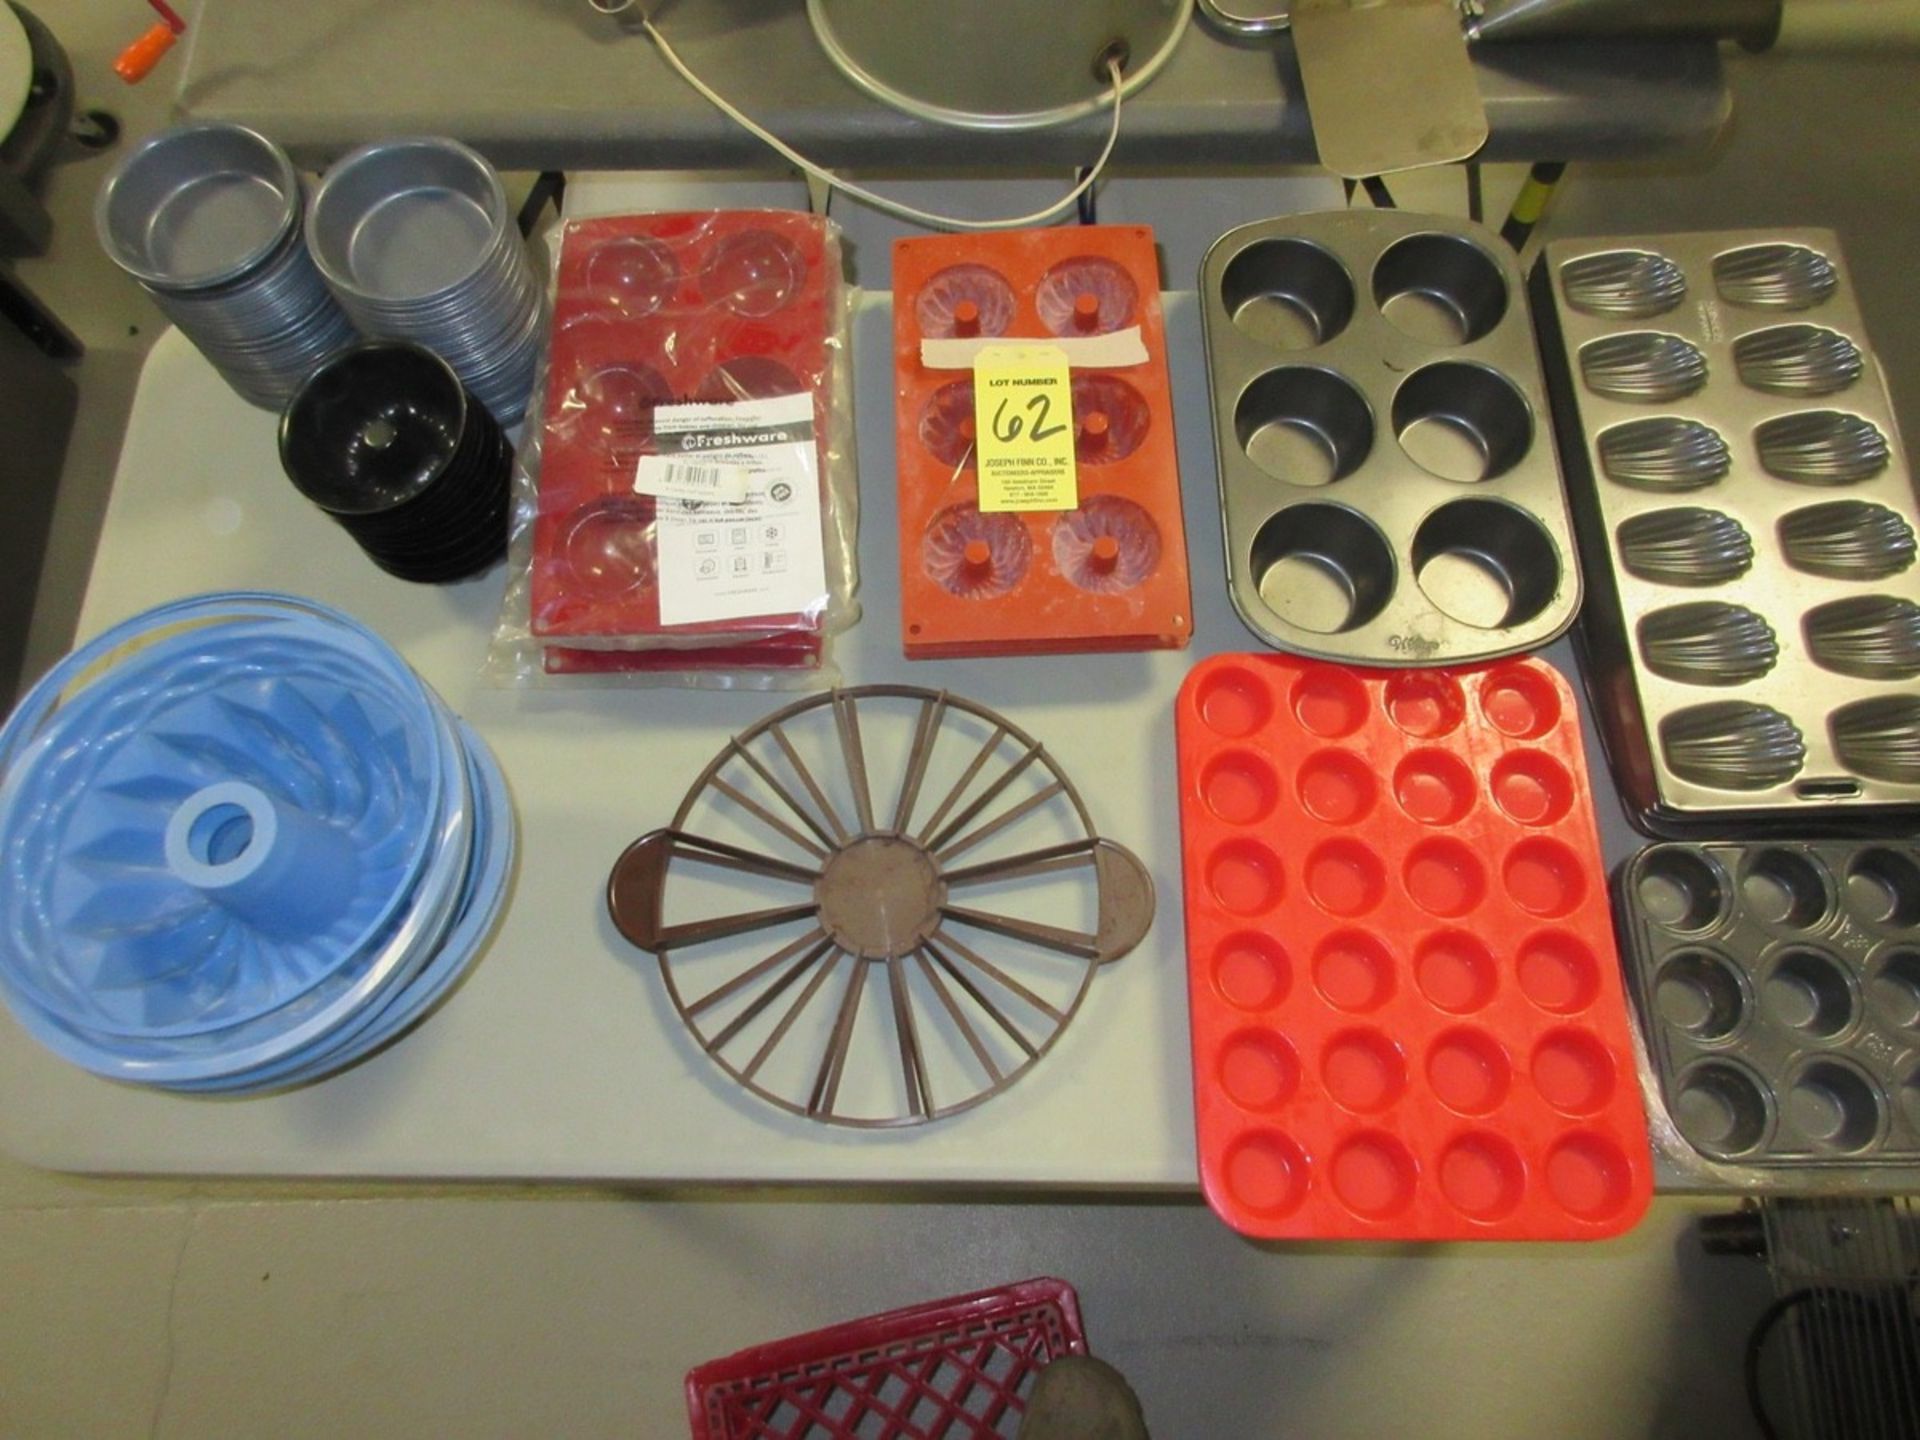 LOT Asst. Muffin Pans, Molds, Pans on Table